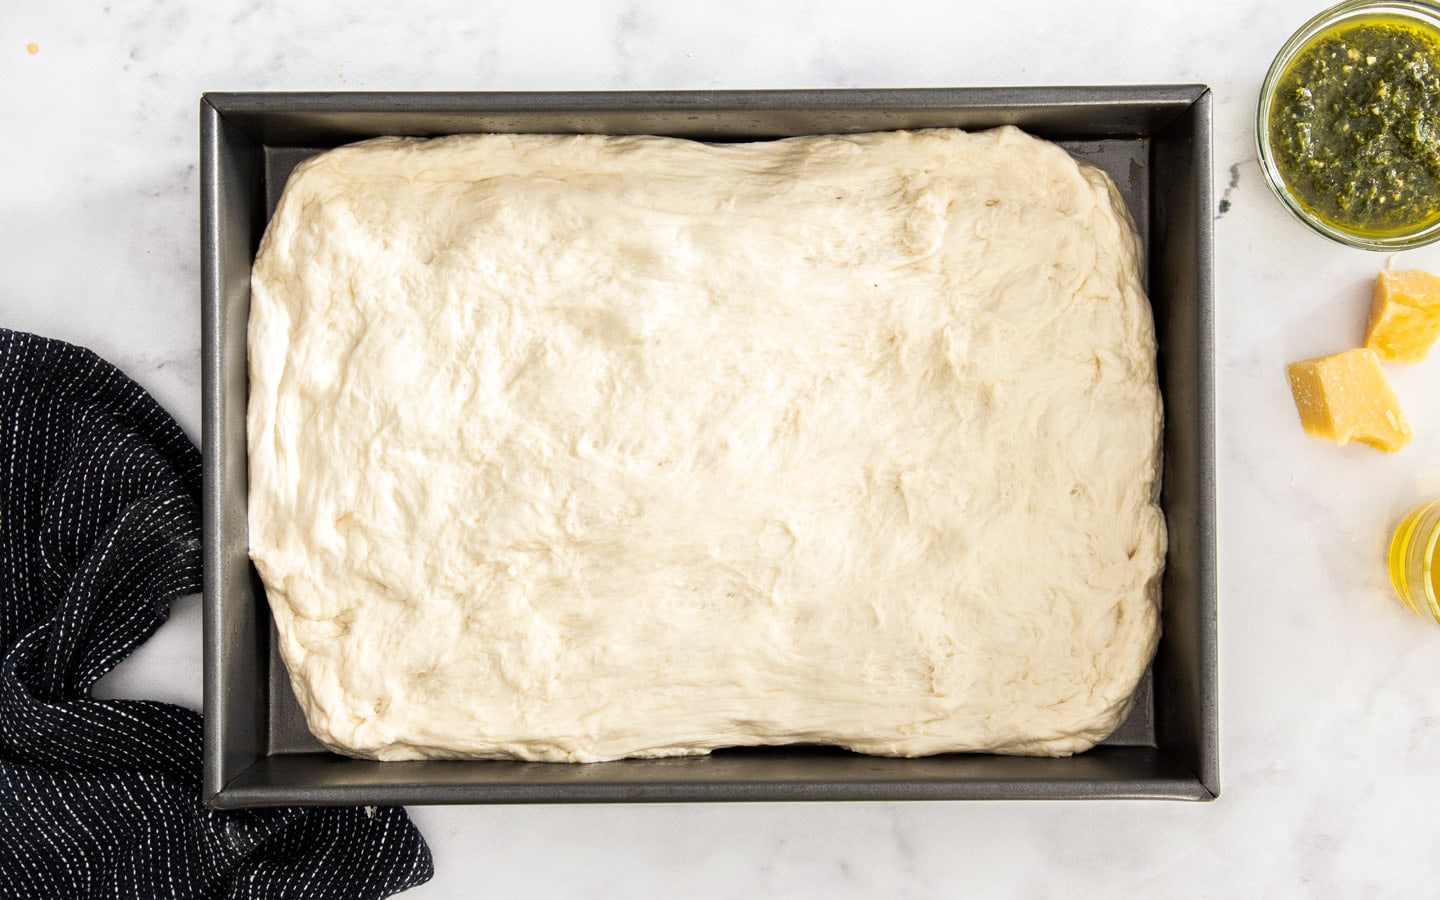 The dough spread out in a 9x13 inch pan.